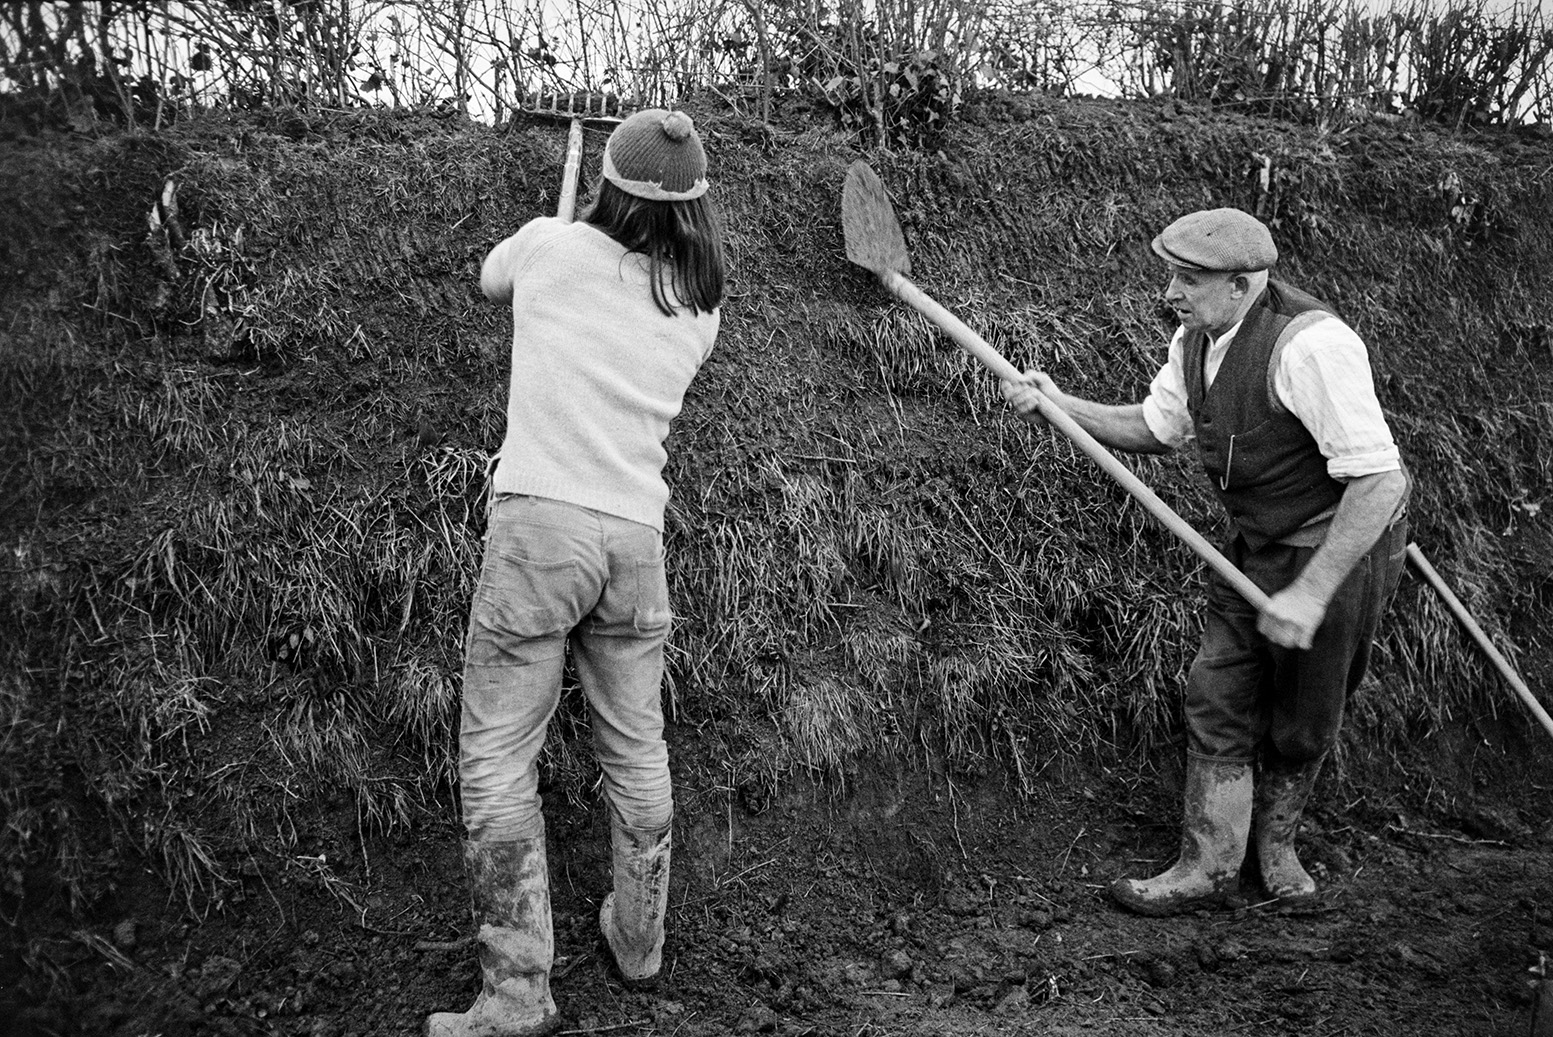 Derek Bright, on the left, and Tom Hooper clatting, building up the hedgebank with squares of turf, in a field at Mill Road Farm, Beaford. They are using a fork and spade. The farm was also known as Jeffrys.